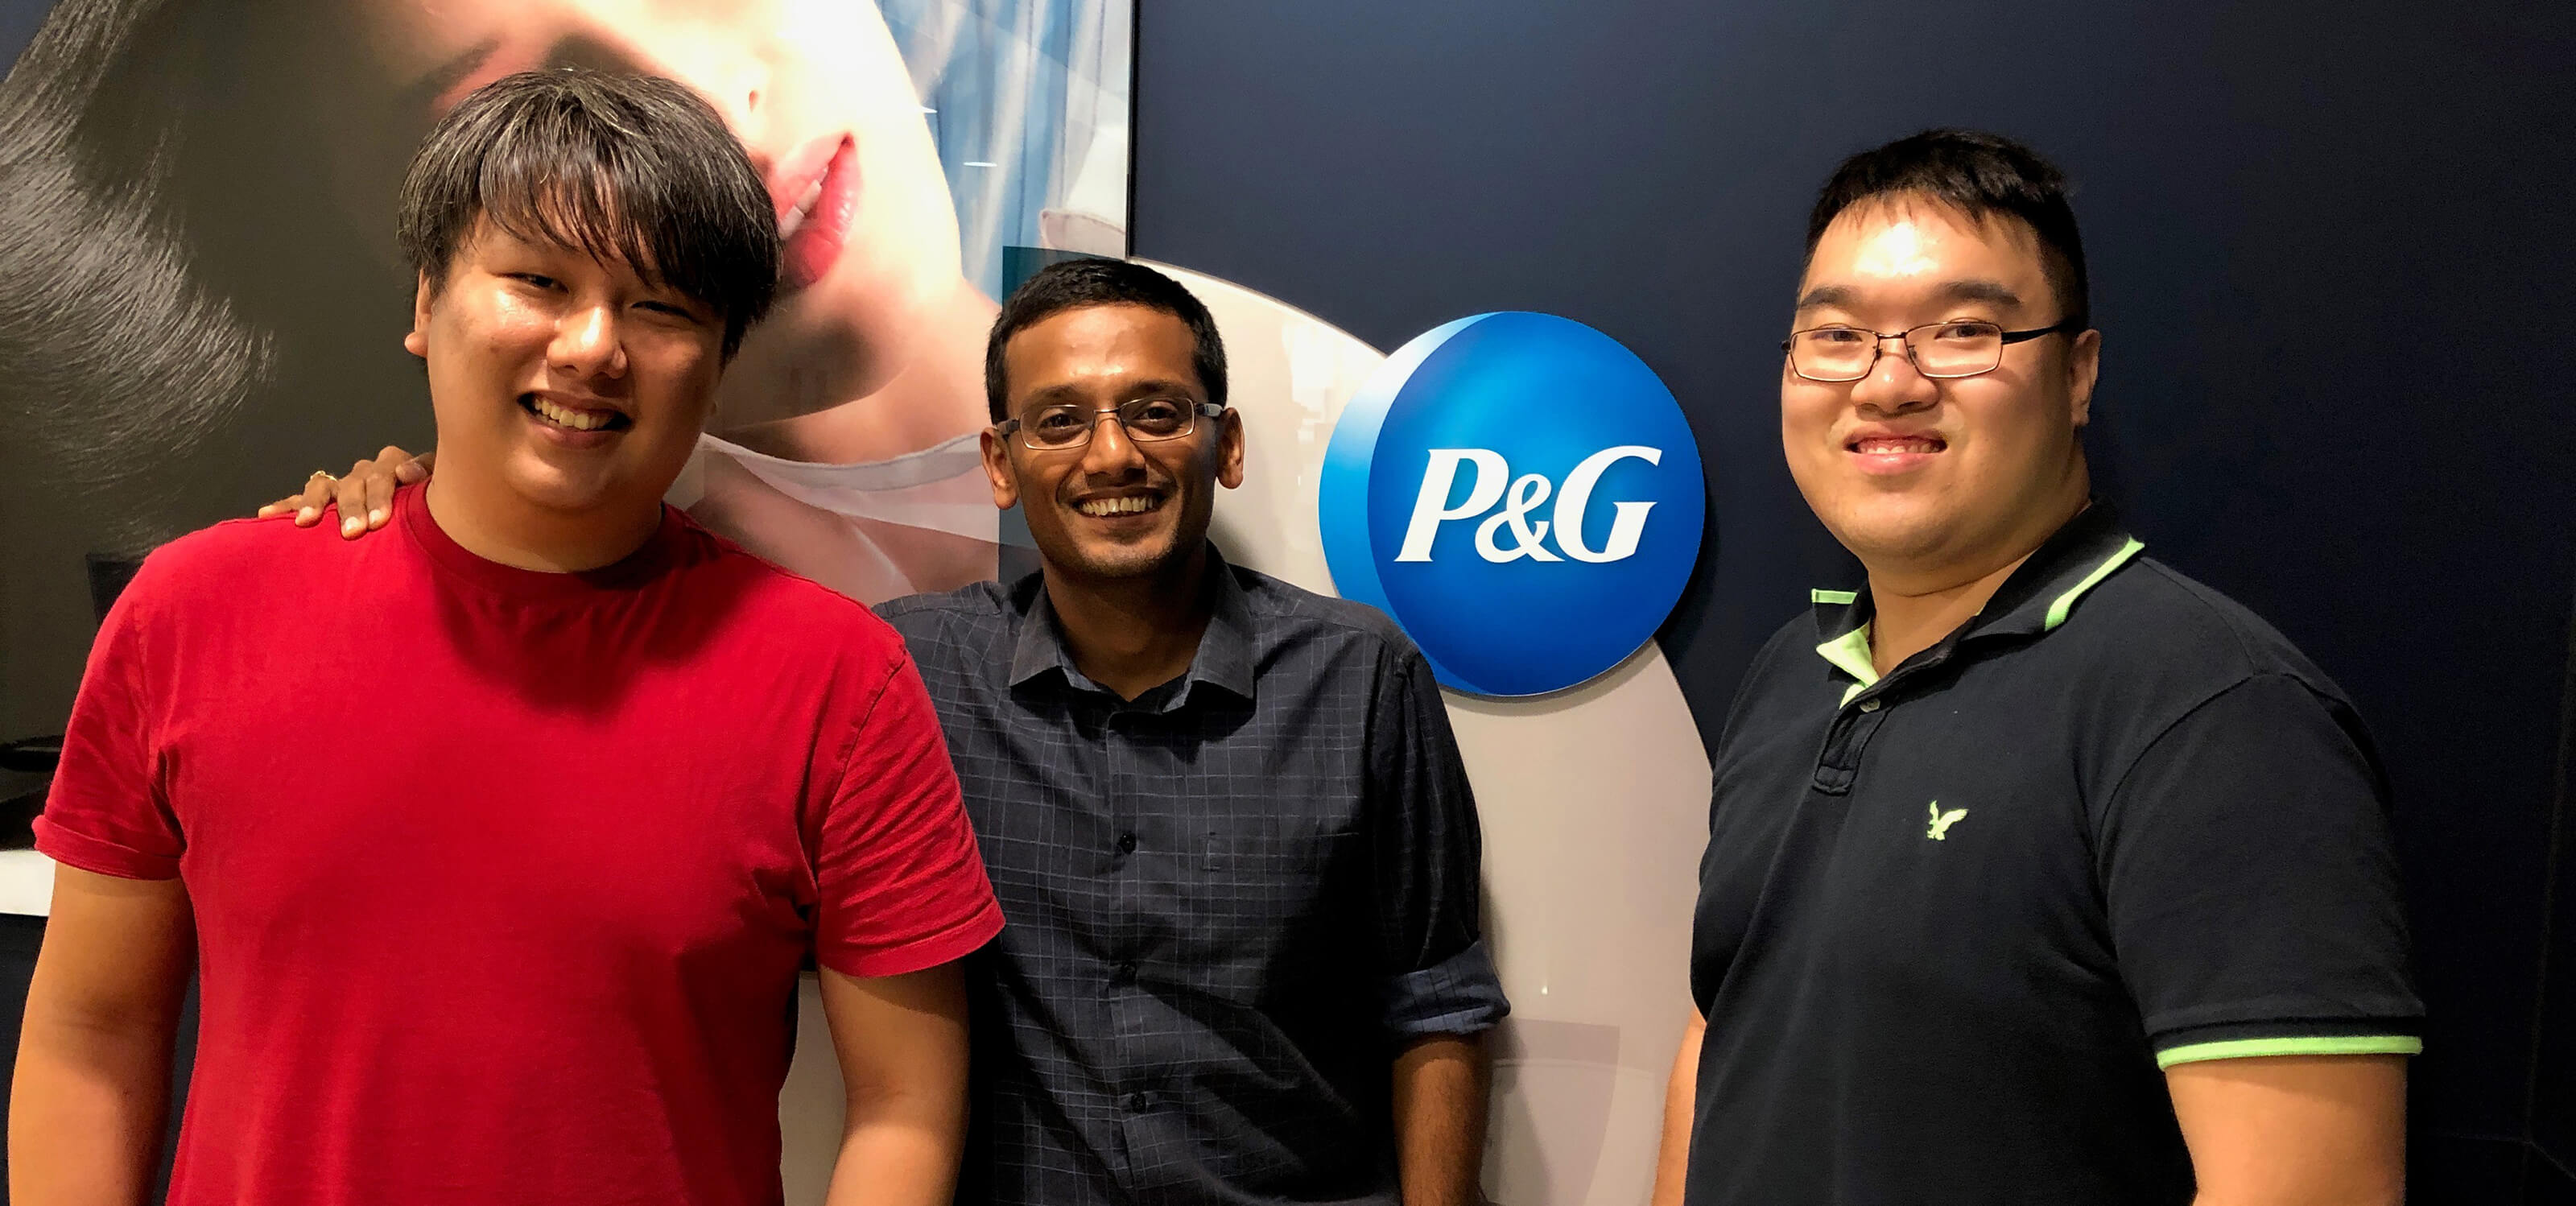 Two SIT-DigiPen (Singapore) graduates stand in front of the Procter & Gamble company logo